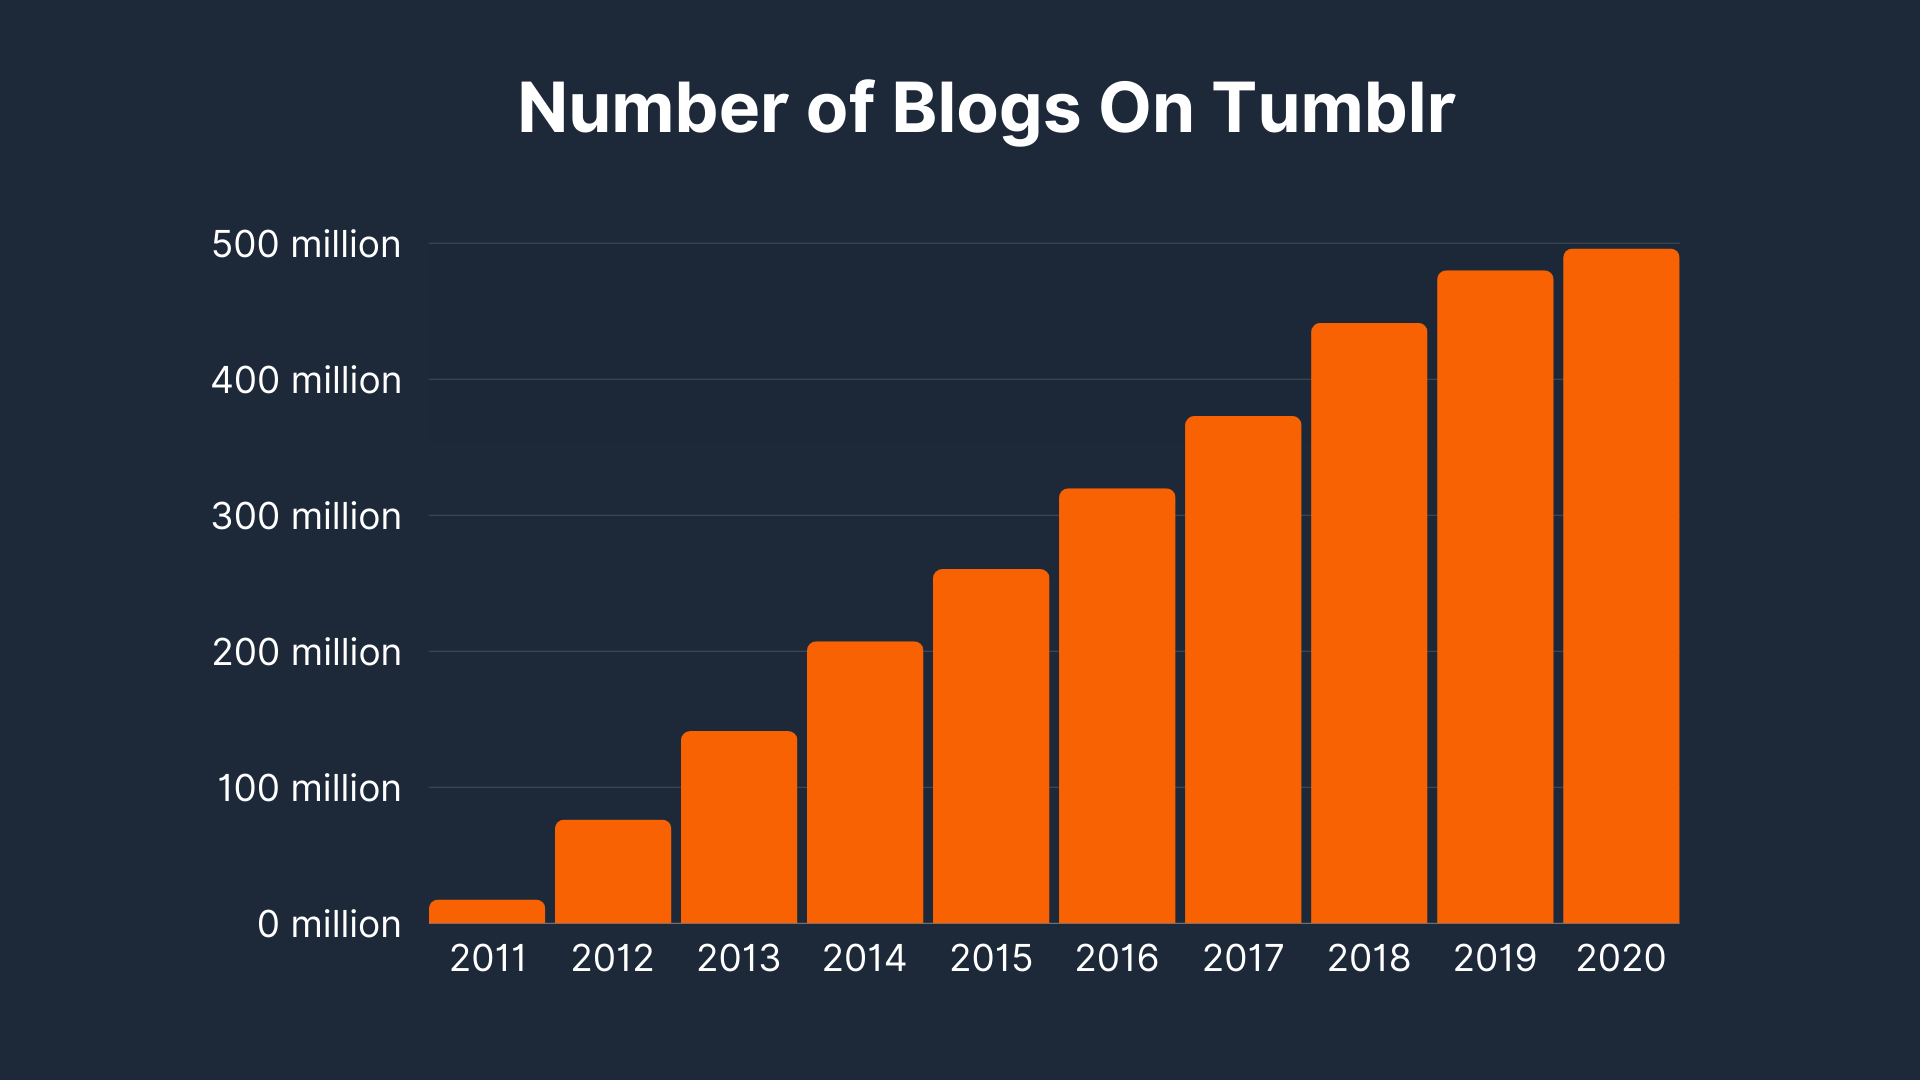 Number of Blogs On Tumblr